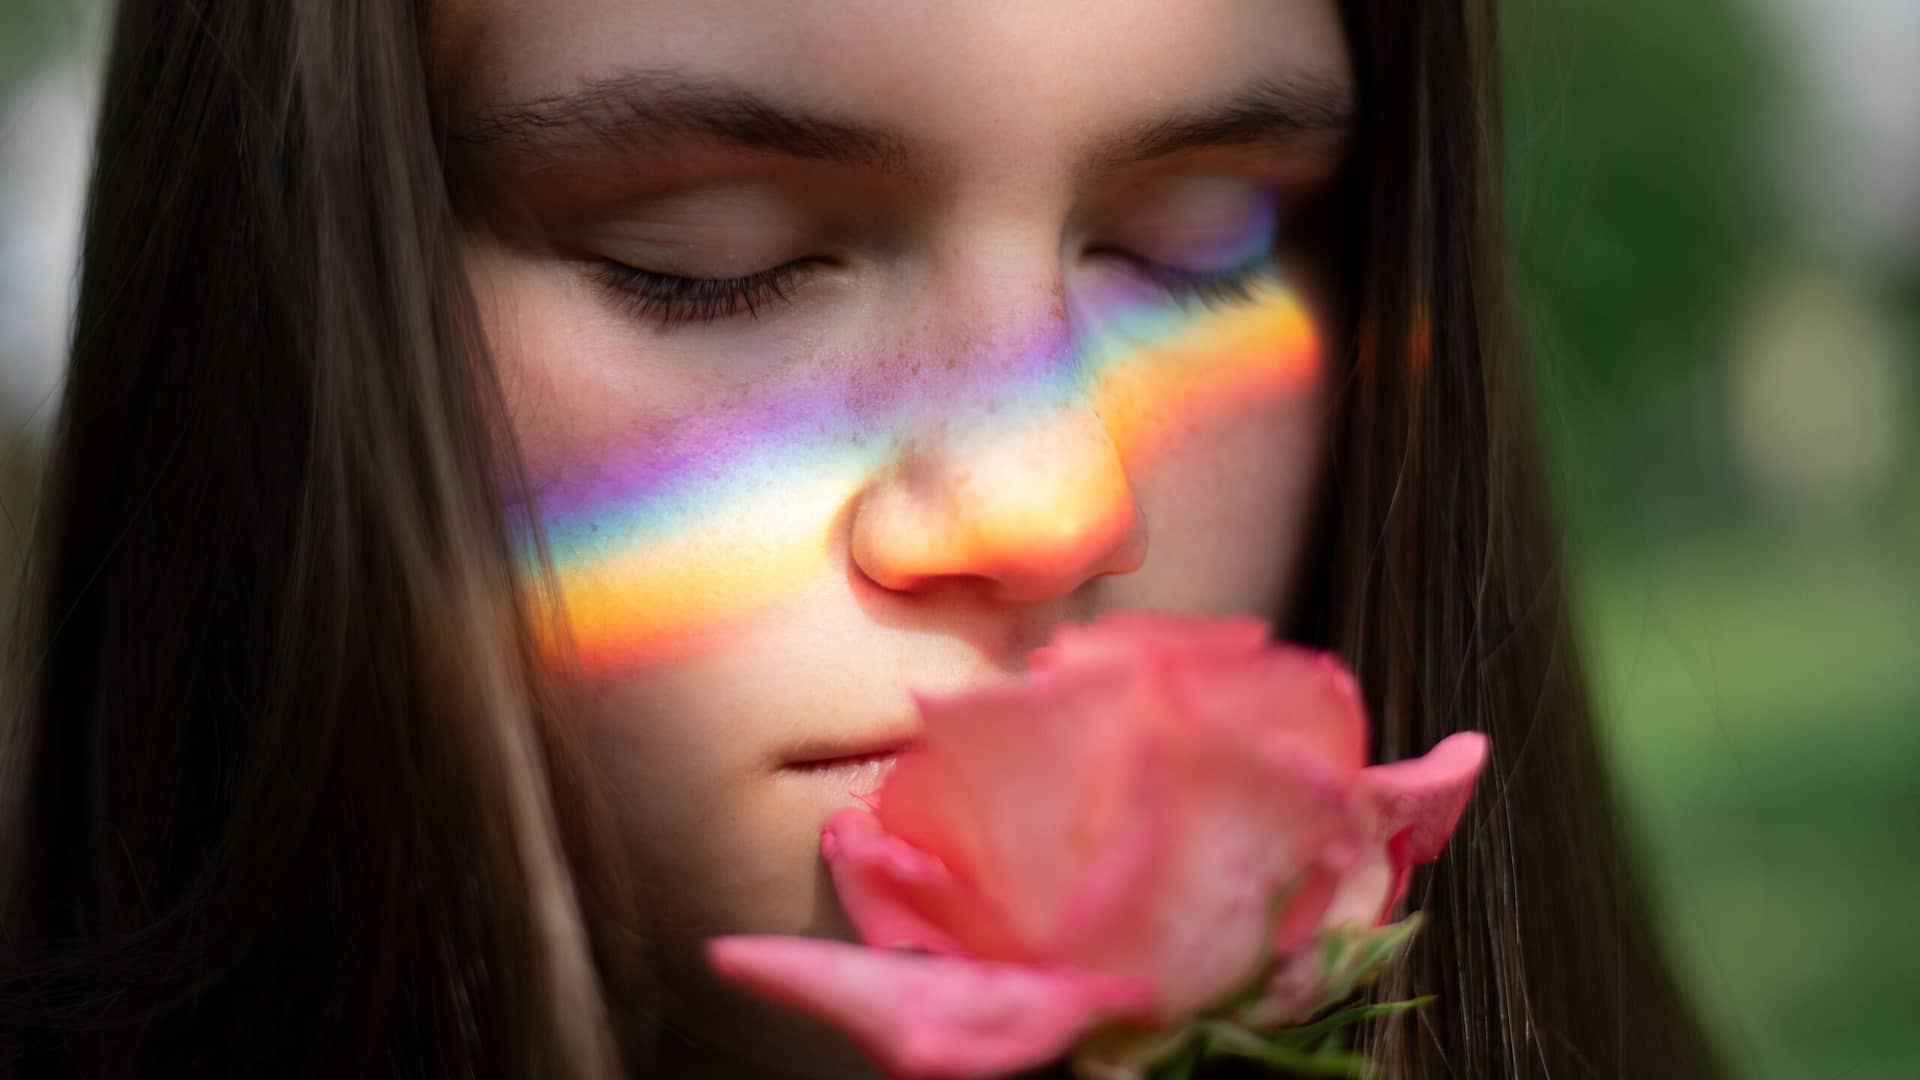 Image: A girl smelling a rose with deep satisfaction